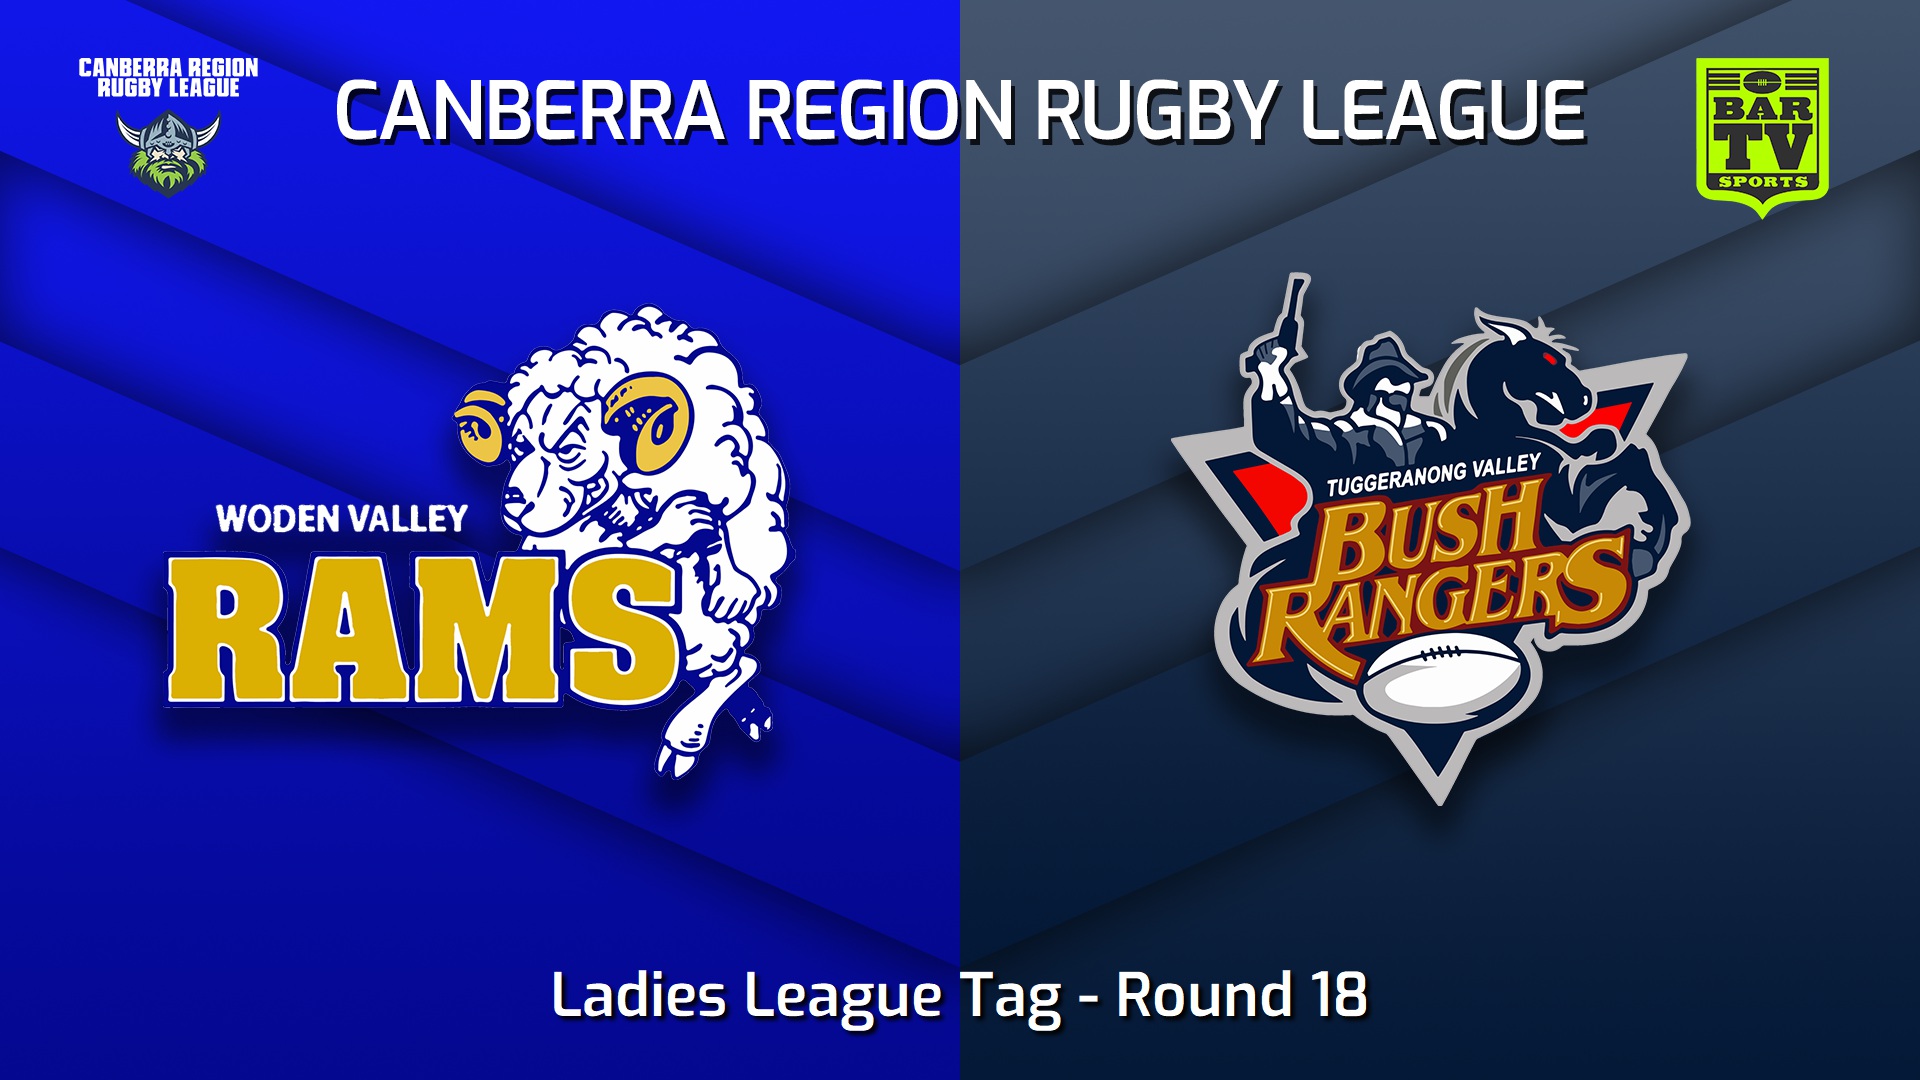 Canberra Round 18 - Ladies League Tag